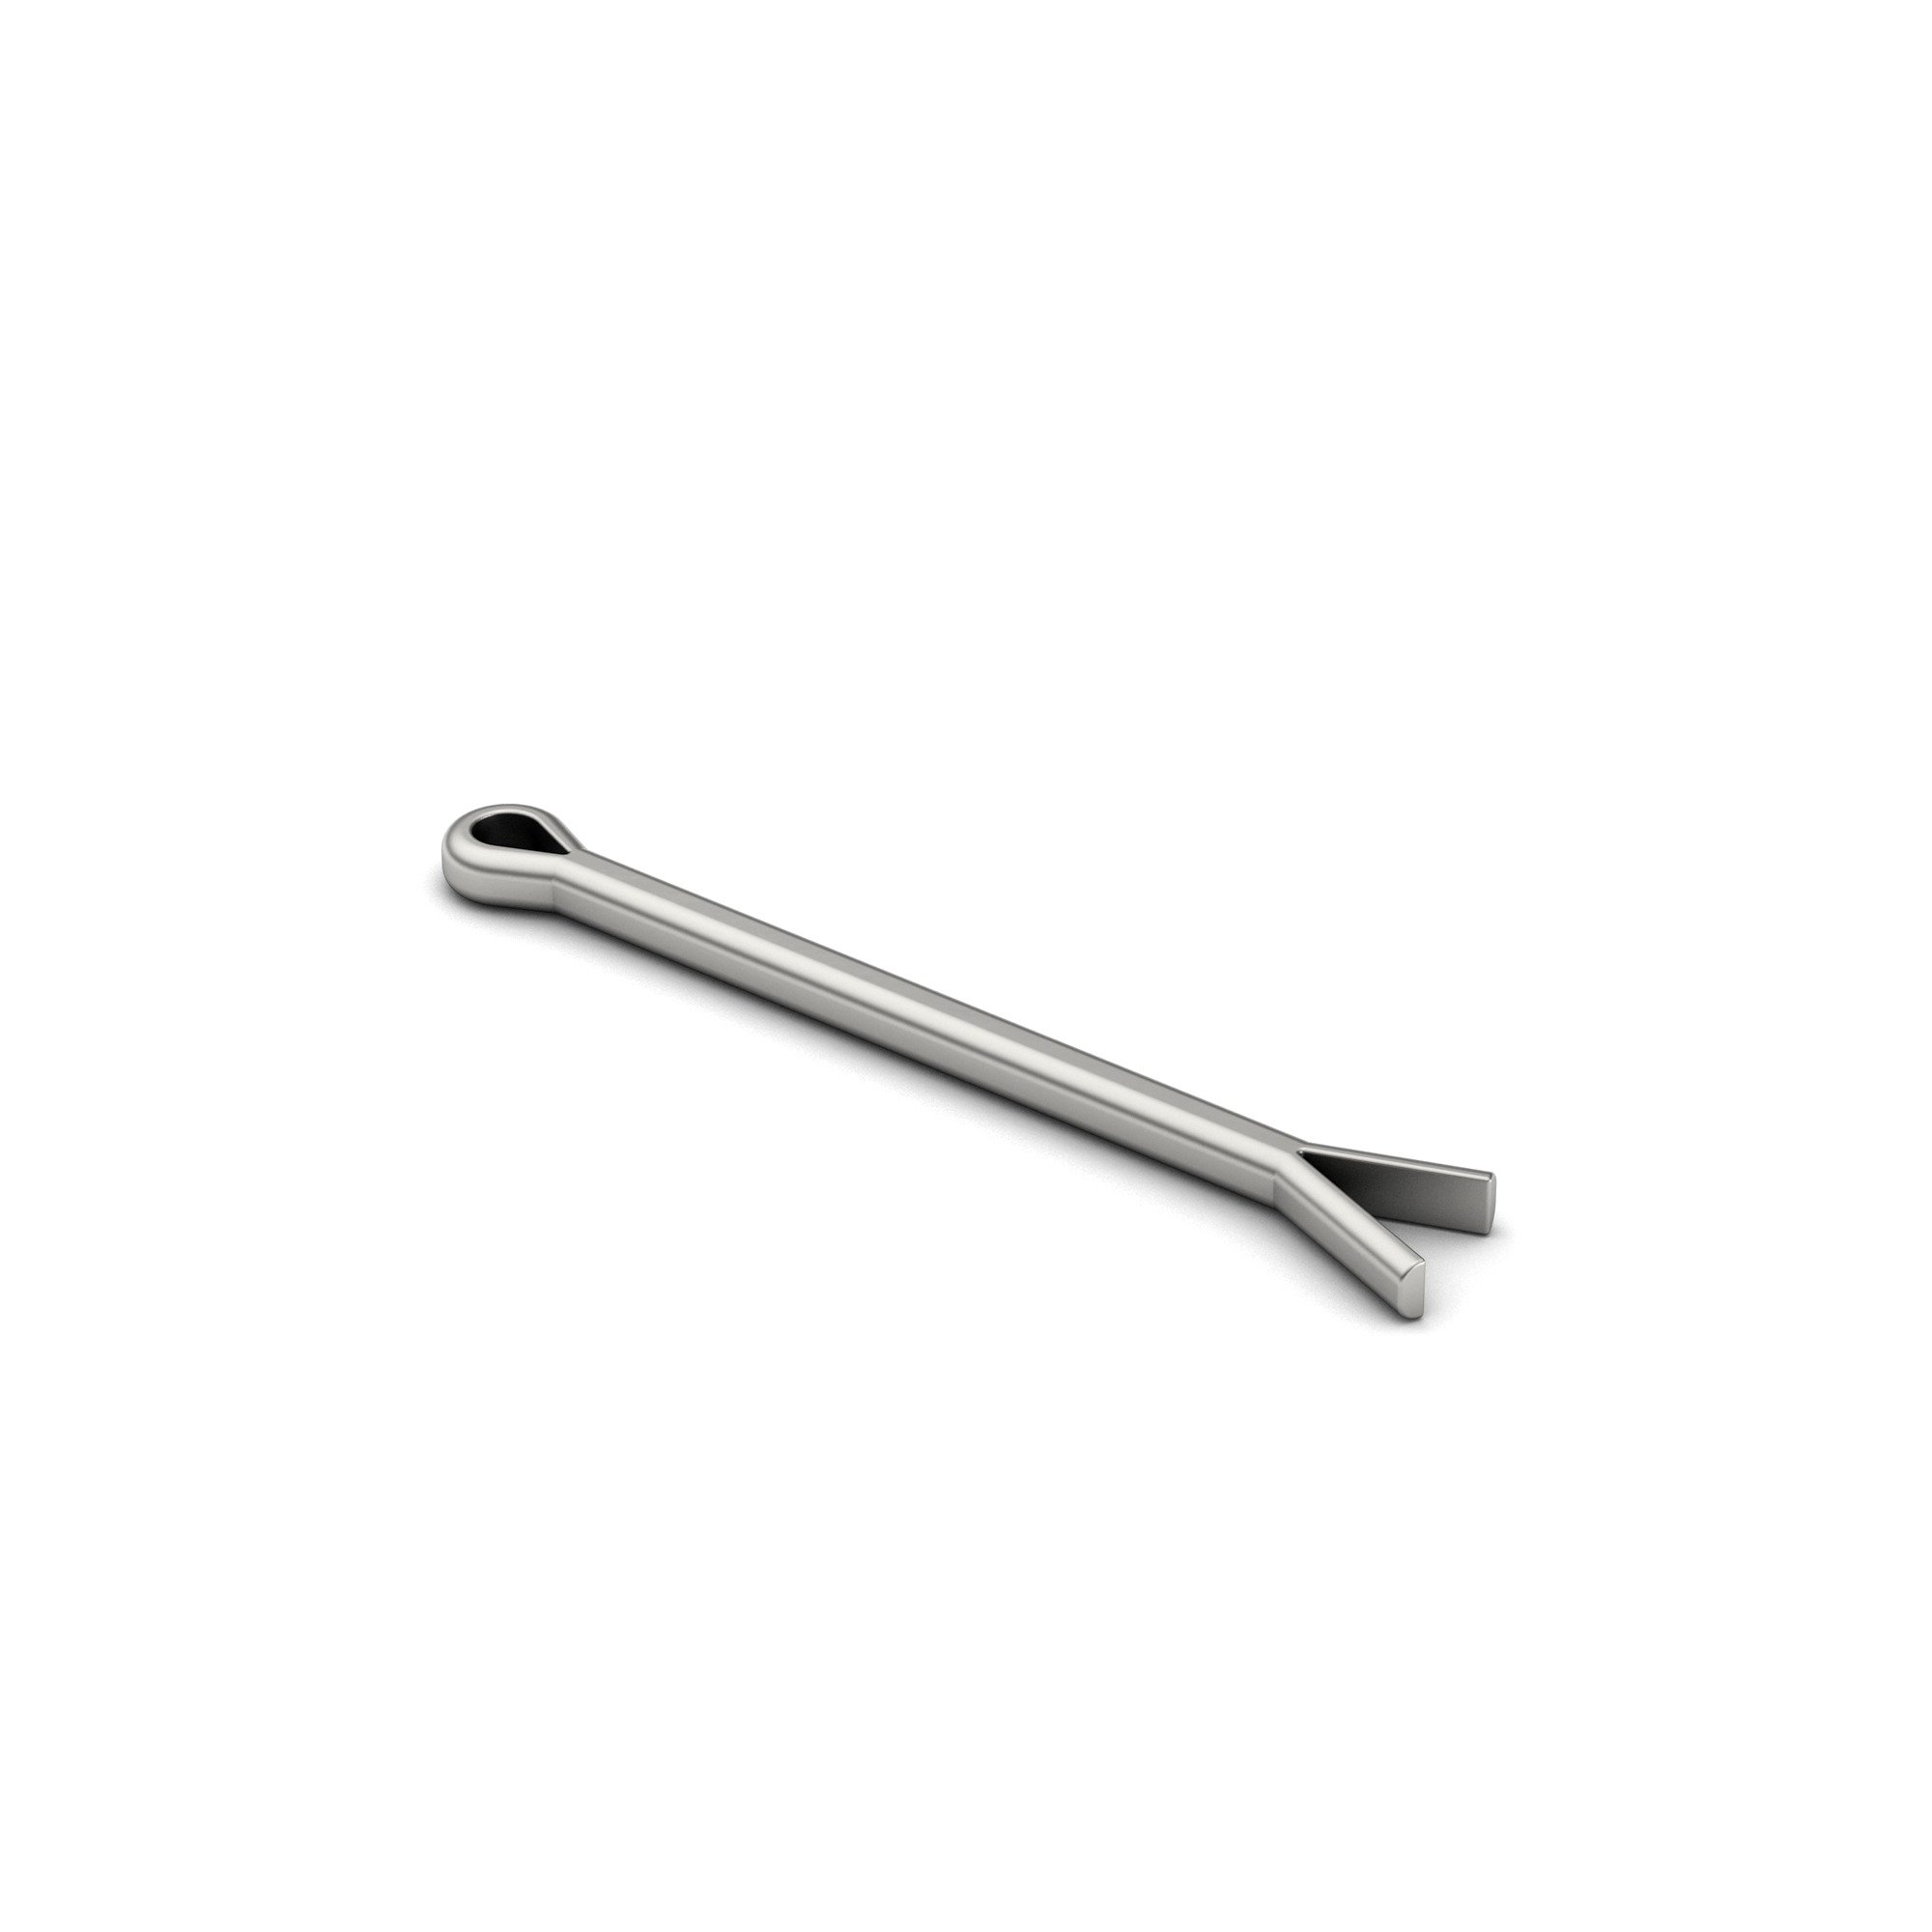 3/32x1 1/2 Carbon Steel Cotter Pin Extended Tip Plain Finish